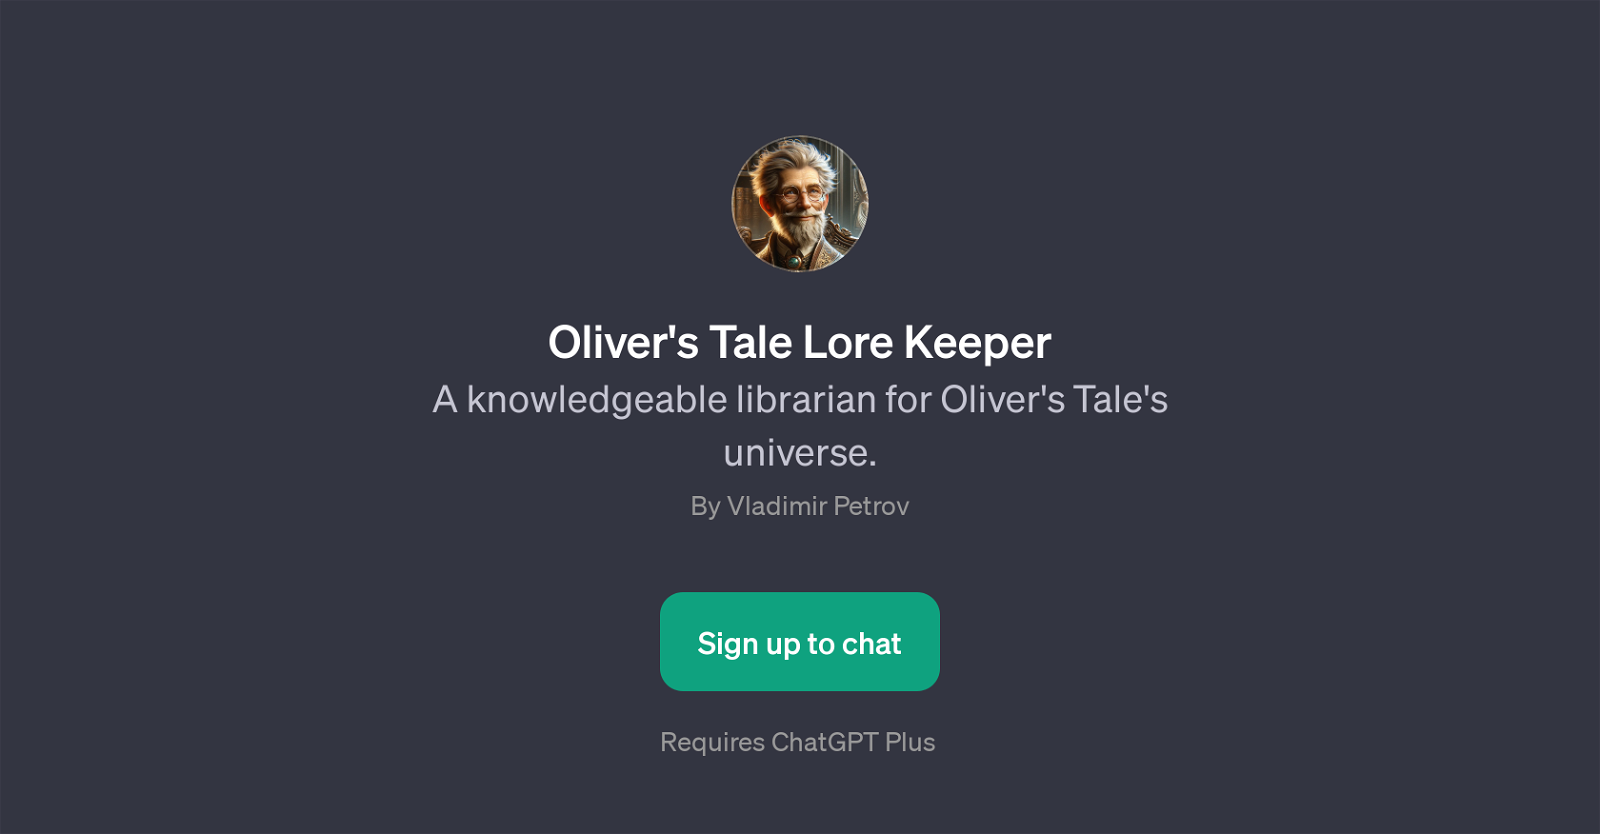 Oliver's Tale Lore Keeper website